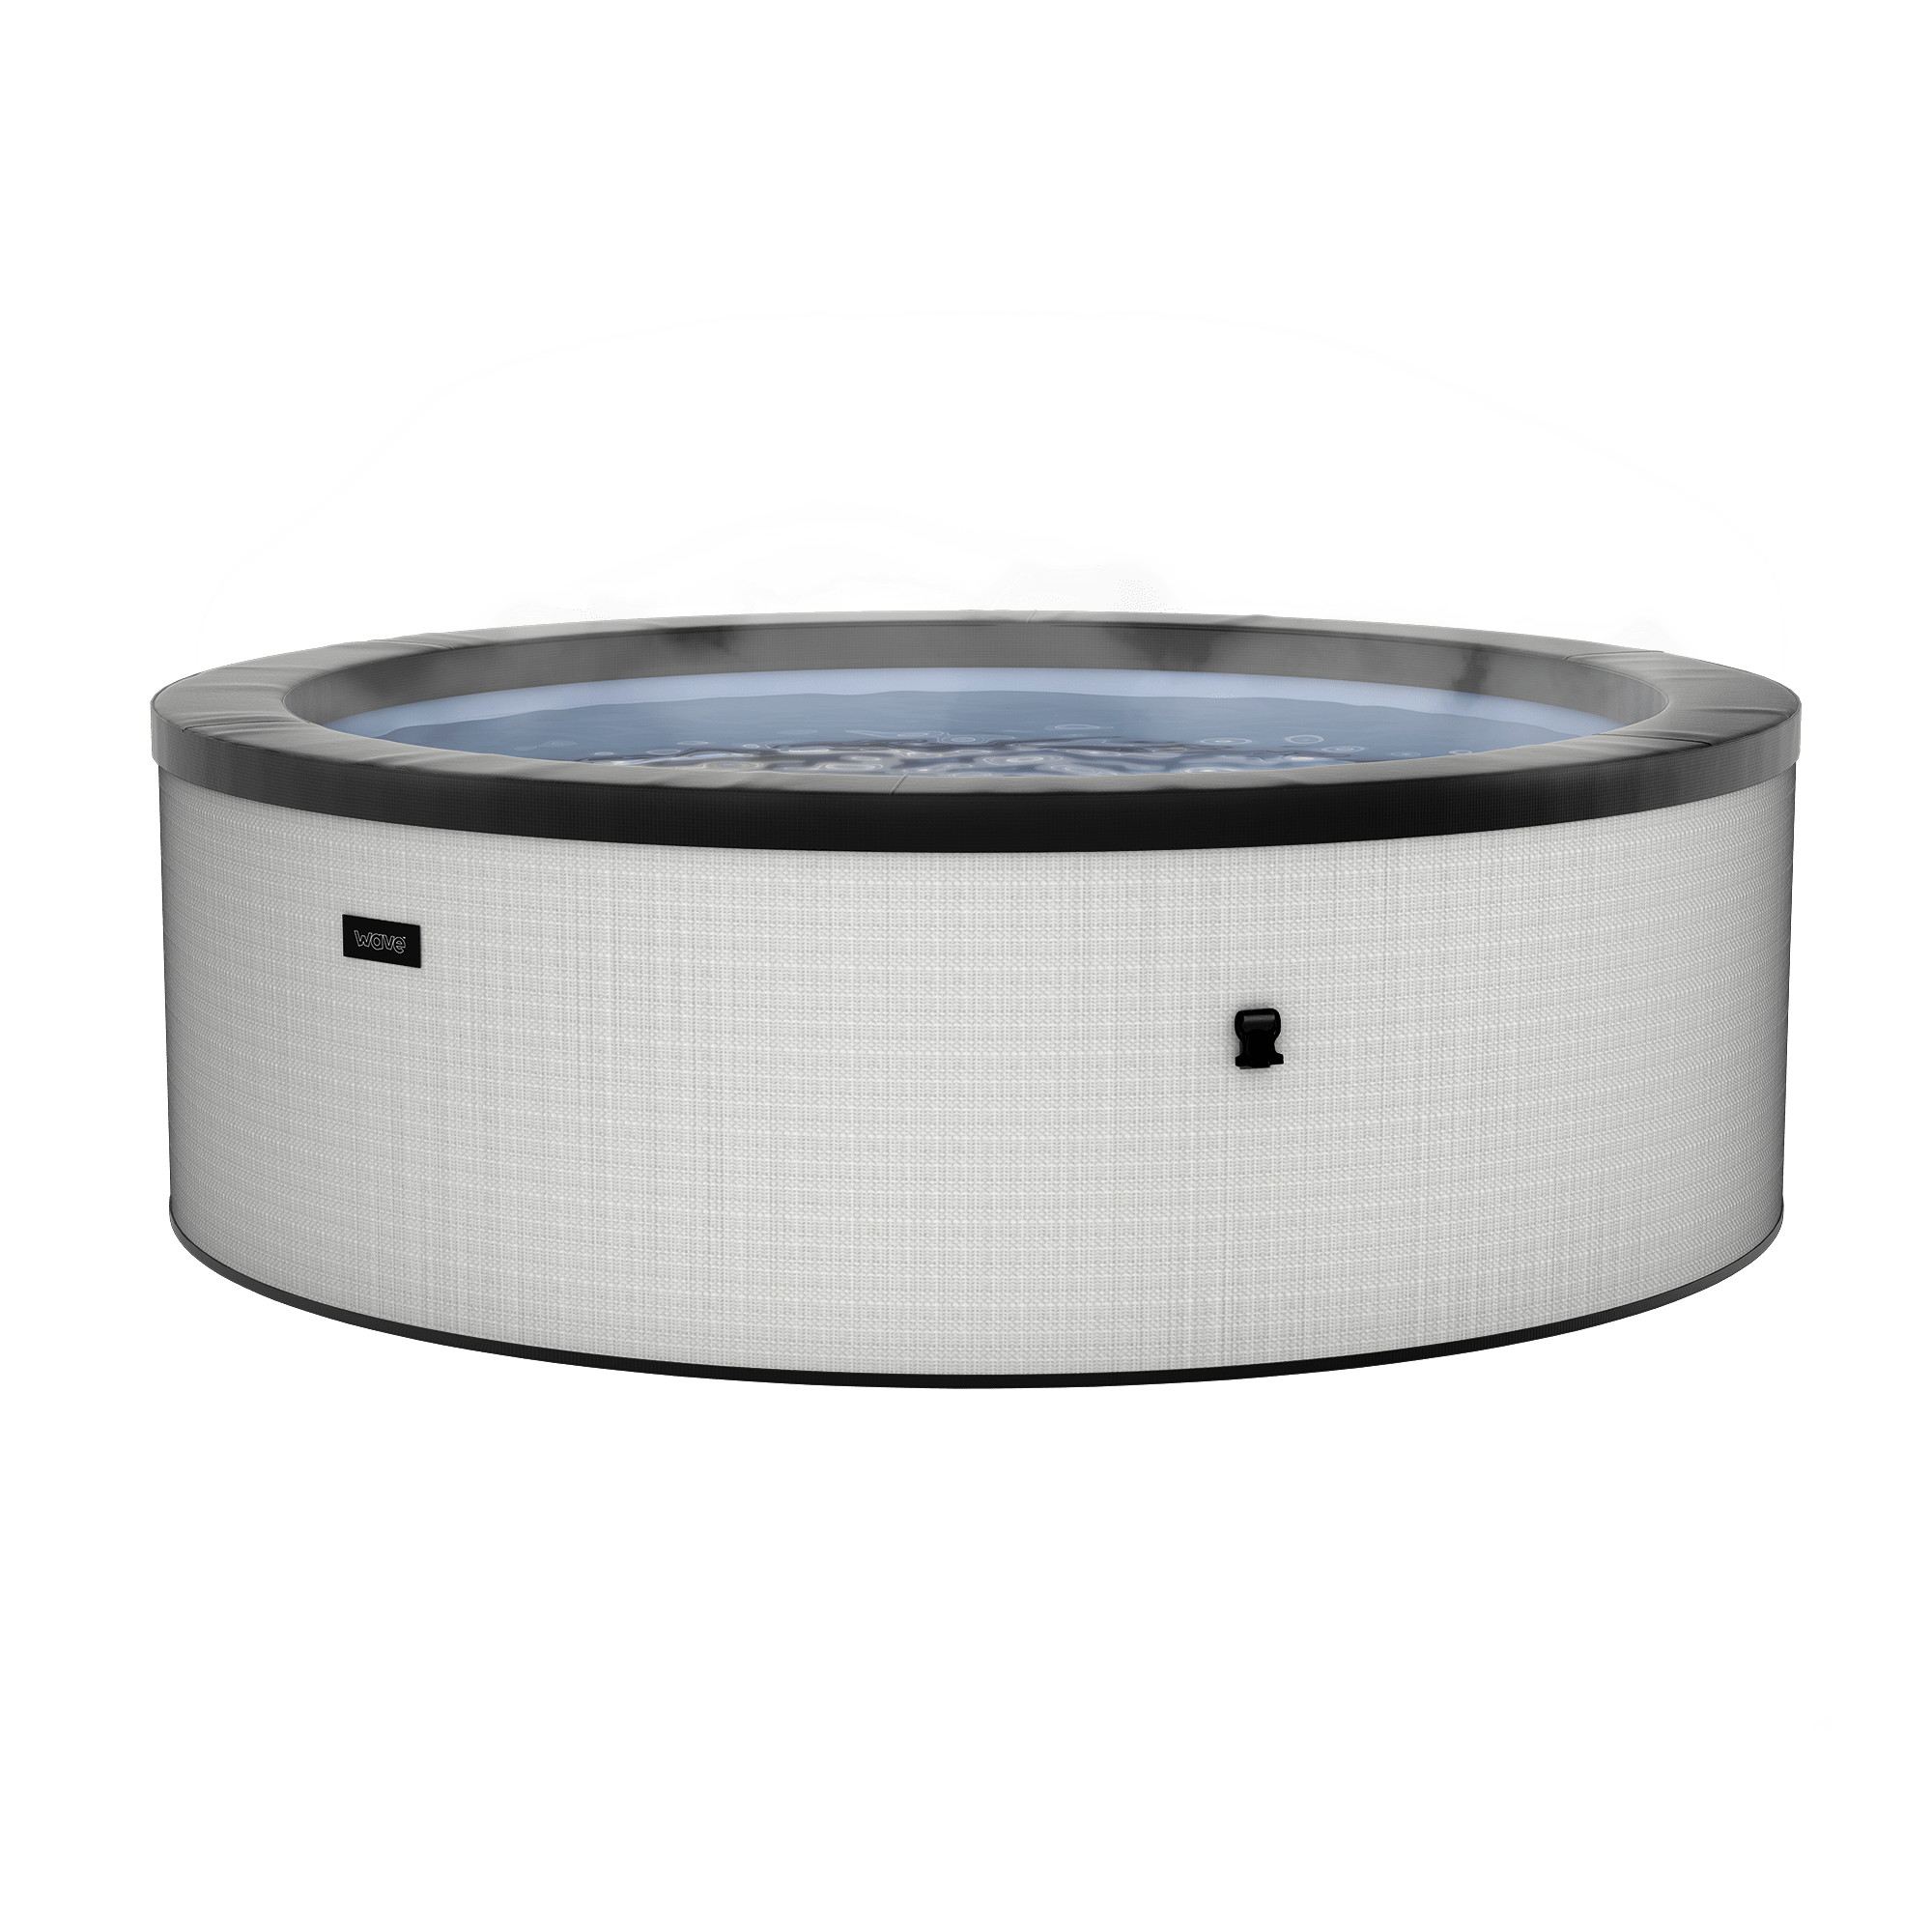 Tahoe v2 | 4/6-Person Eco Foam Hot Tub | Integrated Heater | Graphite Gray - Wave Spas USA